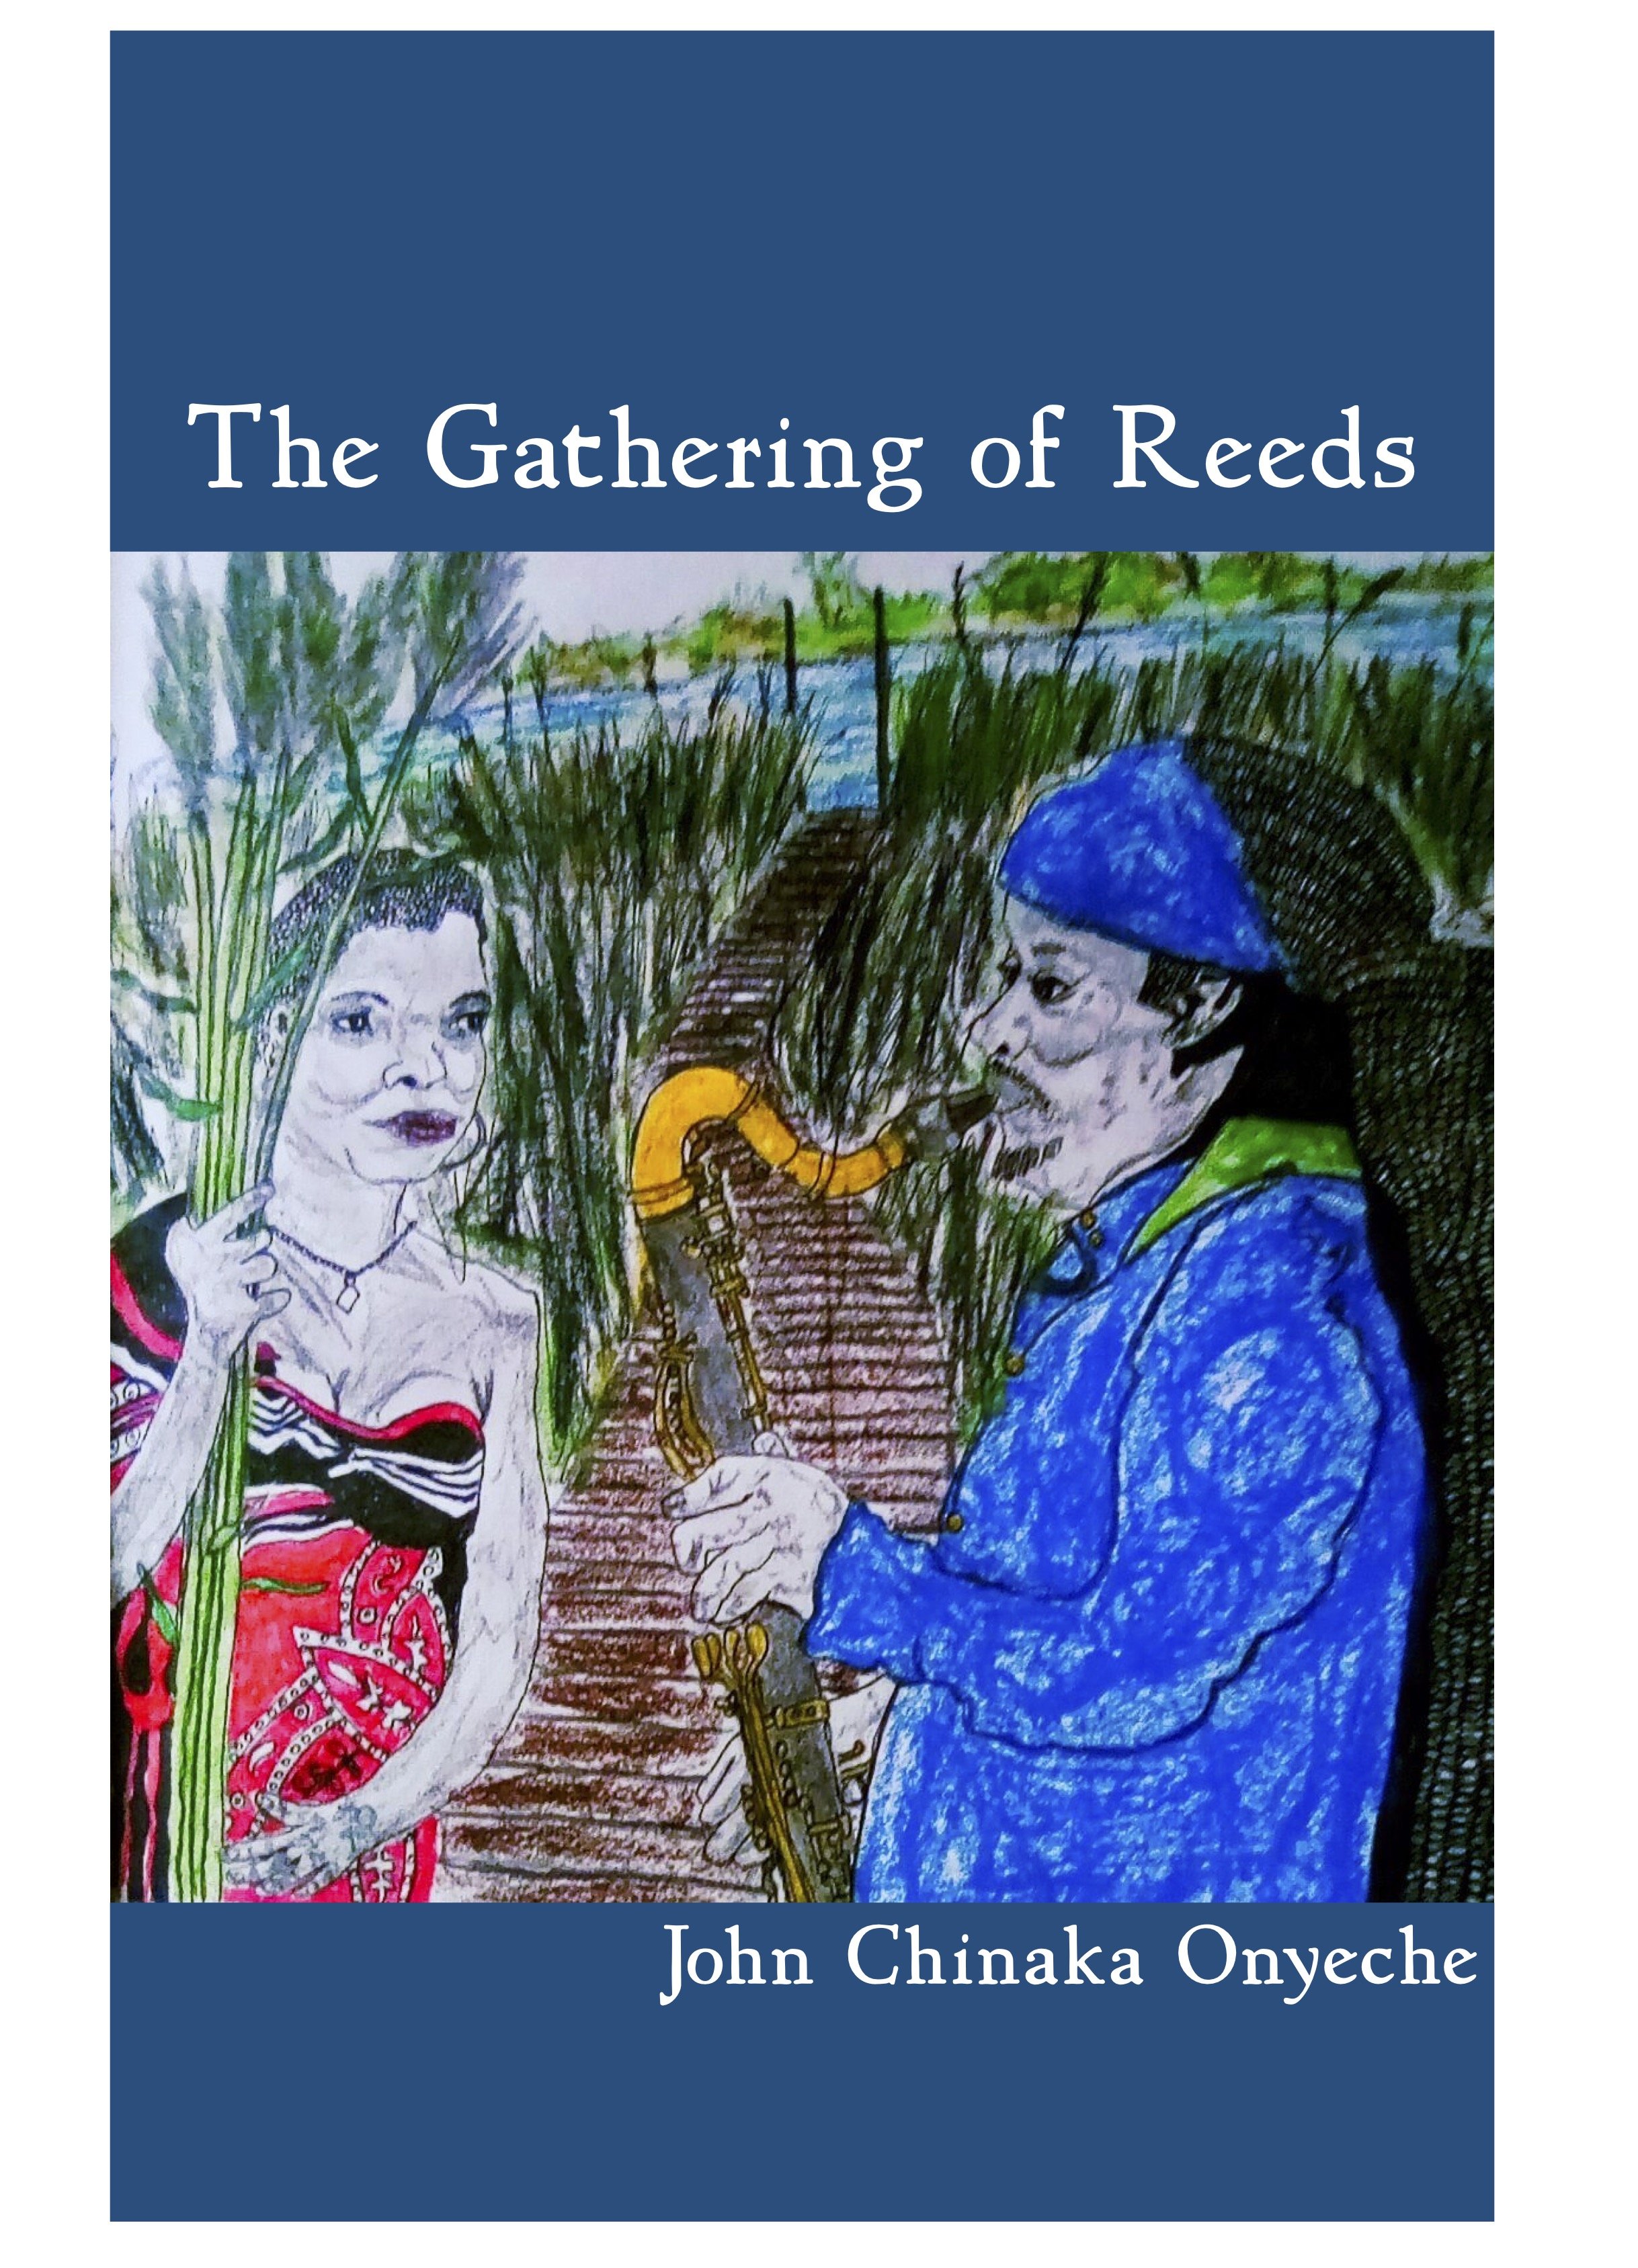 gathering of reeds cover.jpg